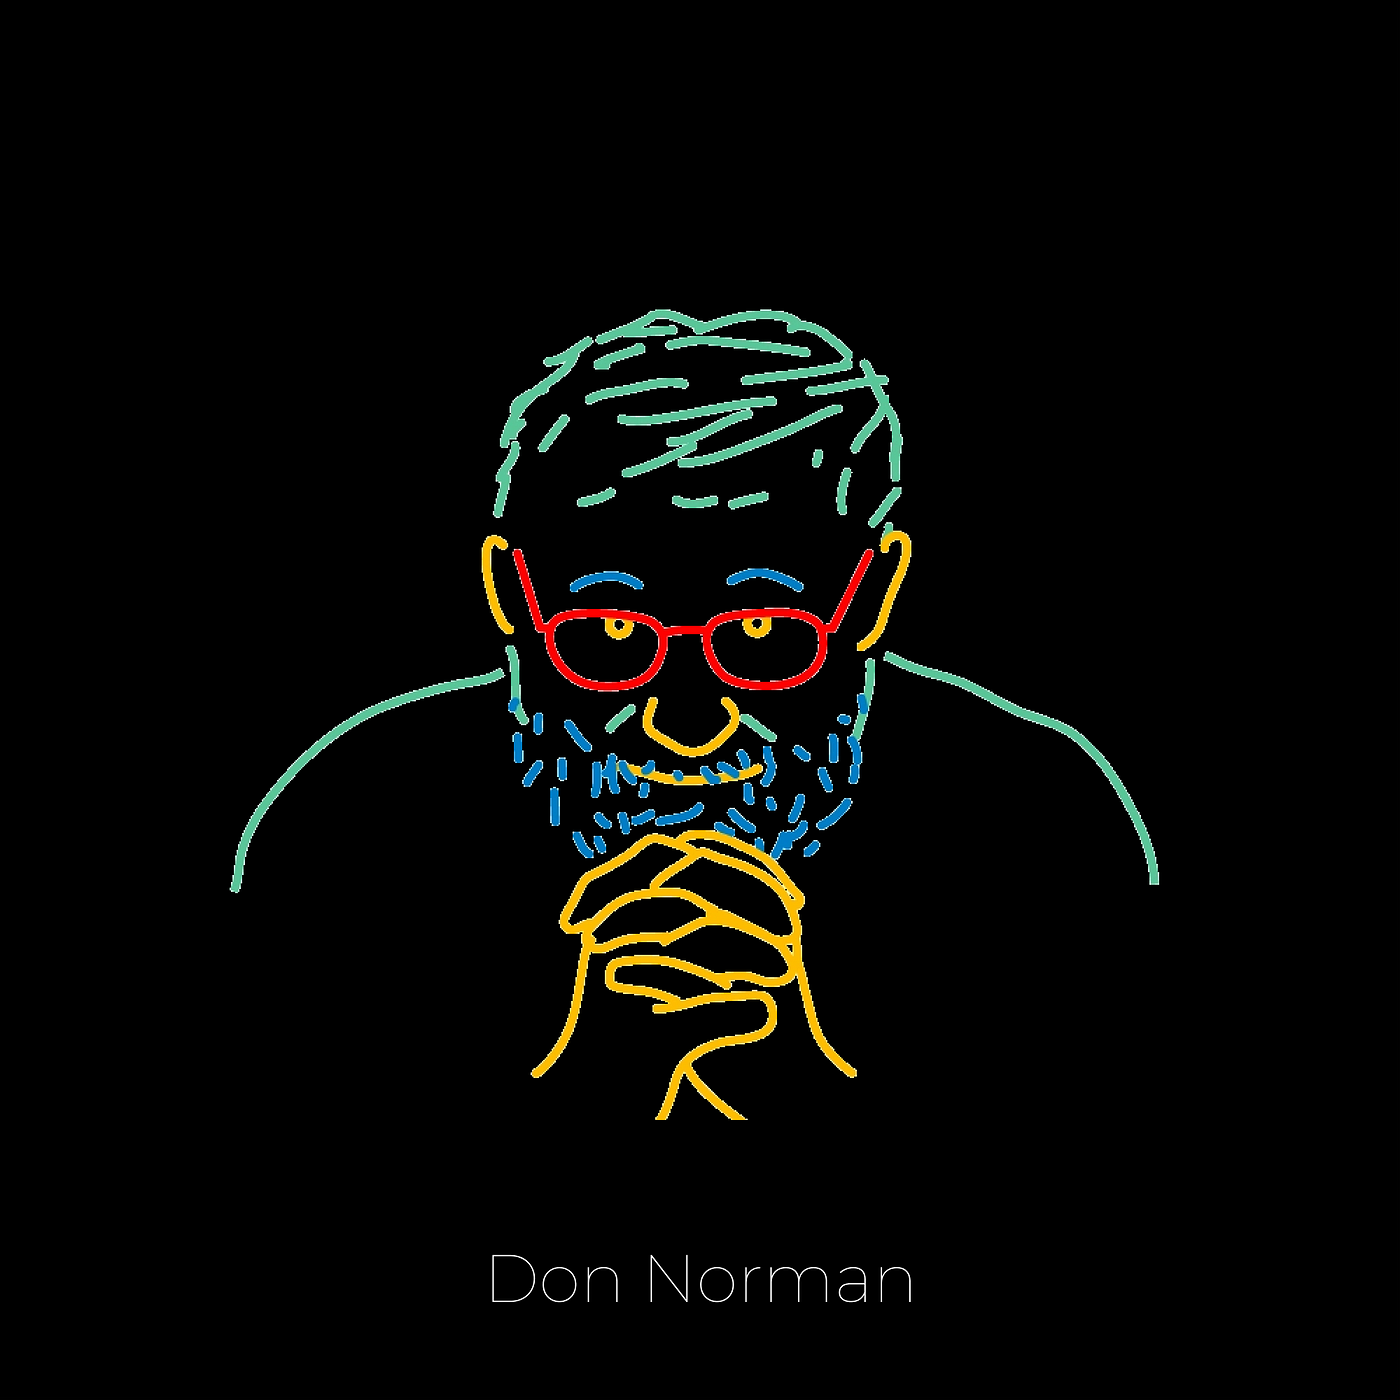 Neon line sketch of Don Norman